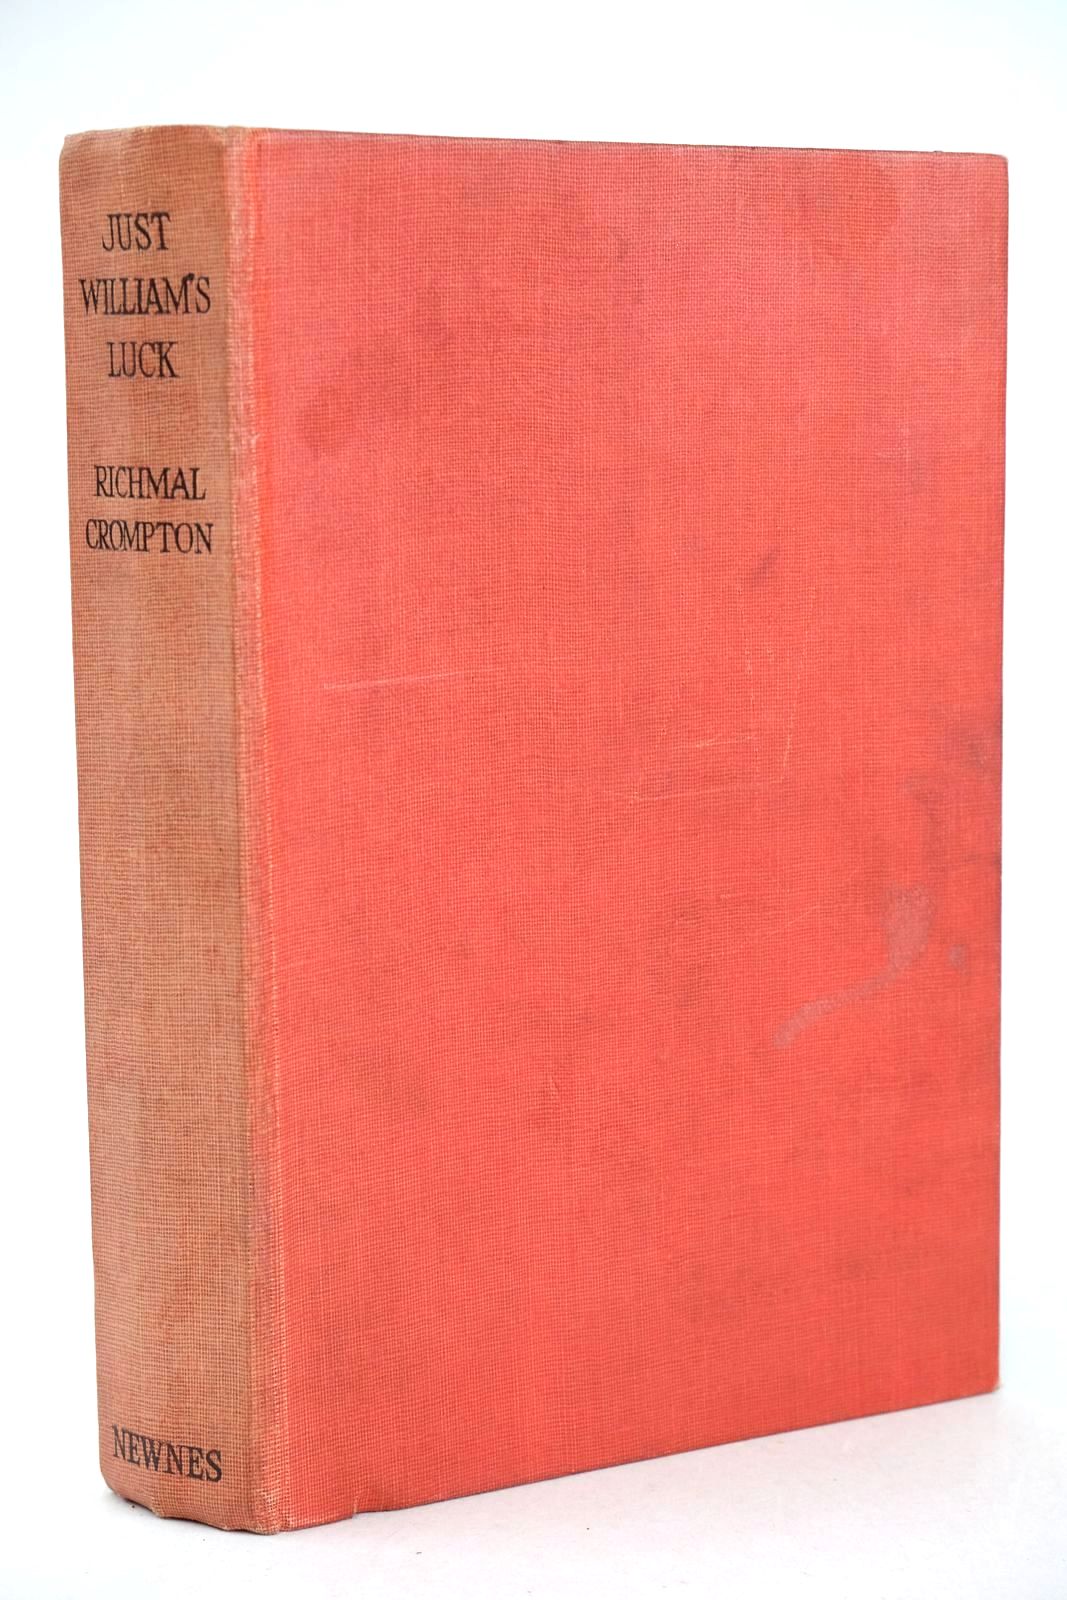 Photo of JUST WILLIAM'S LUCK written by Crompton, Richmal illustrated by Henry, Thomas published by George Newnes Limited (STOCK CODE: 1326117)  for sale by Stella & Rose's Books